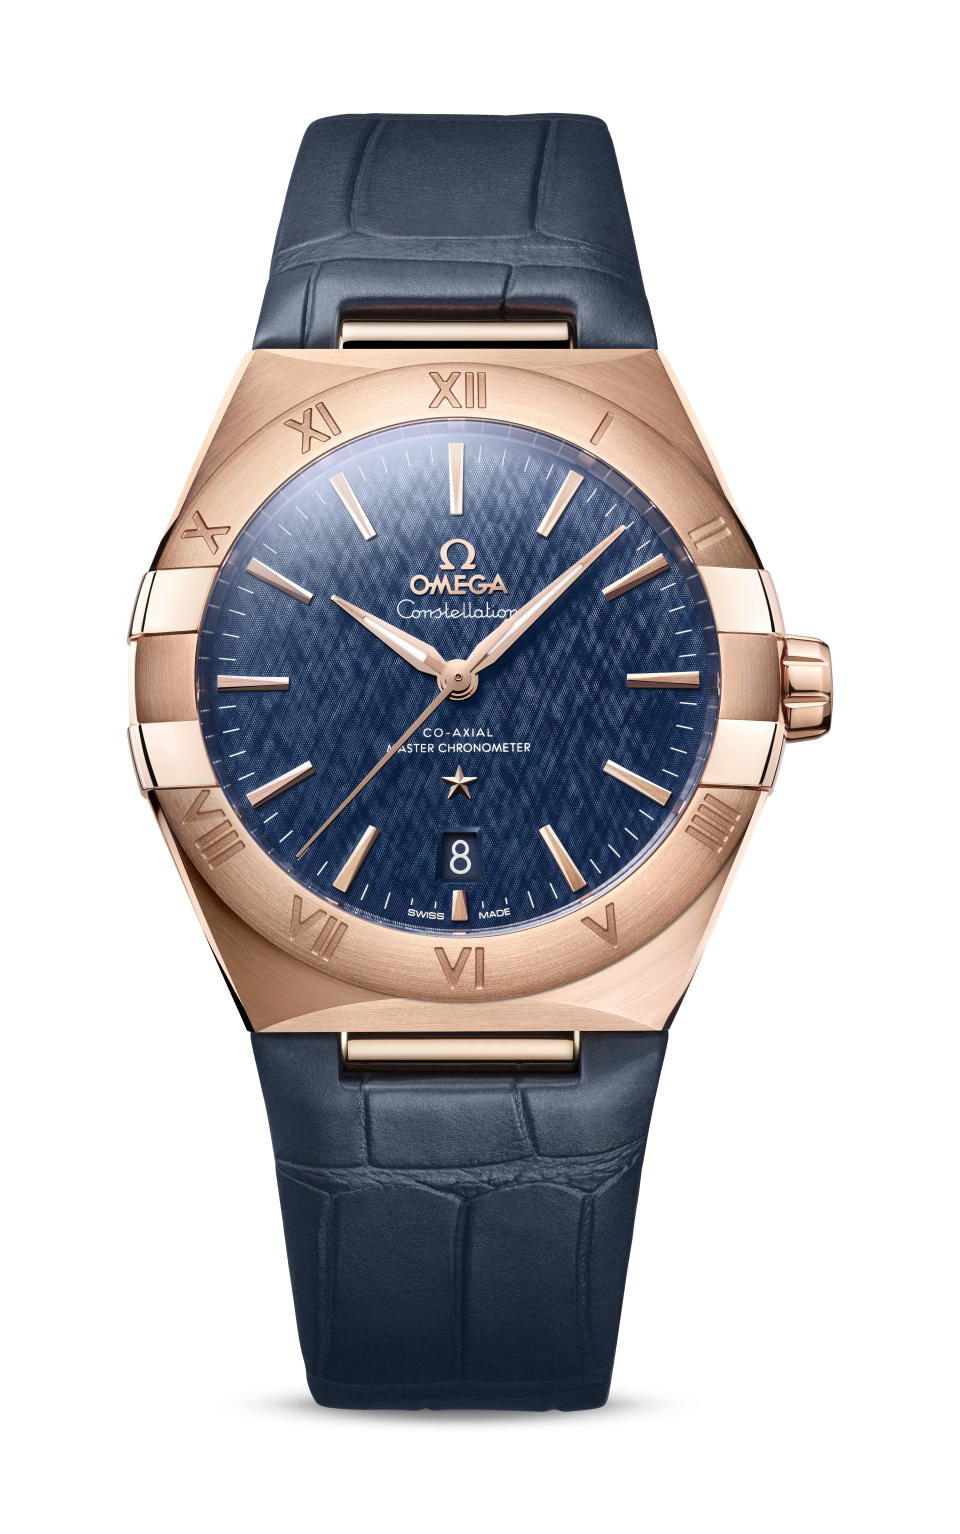 Omega’s Constellation Co-Axial chronometer, 41mm, ,400. - Credit: courtesy